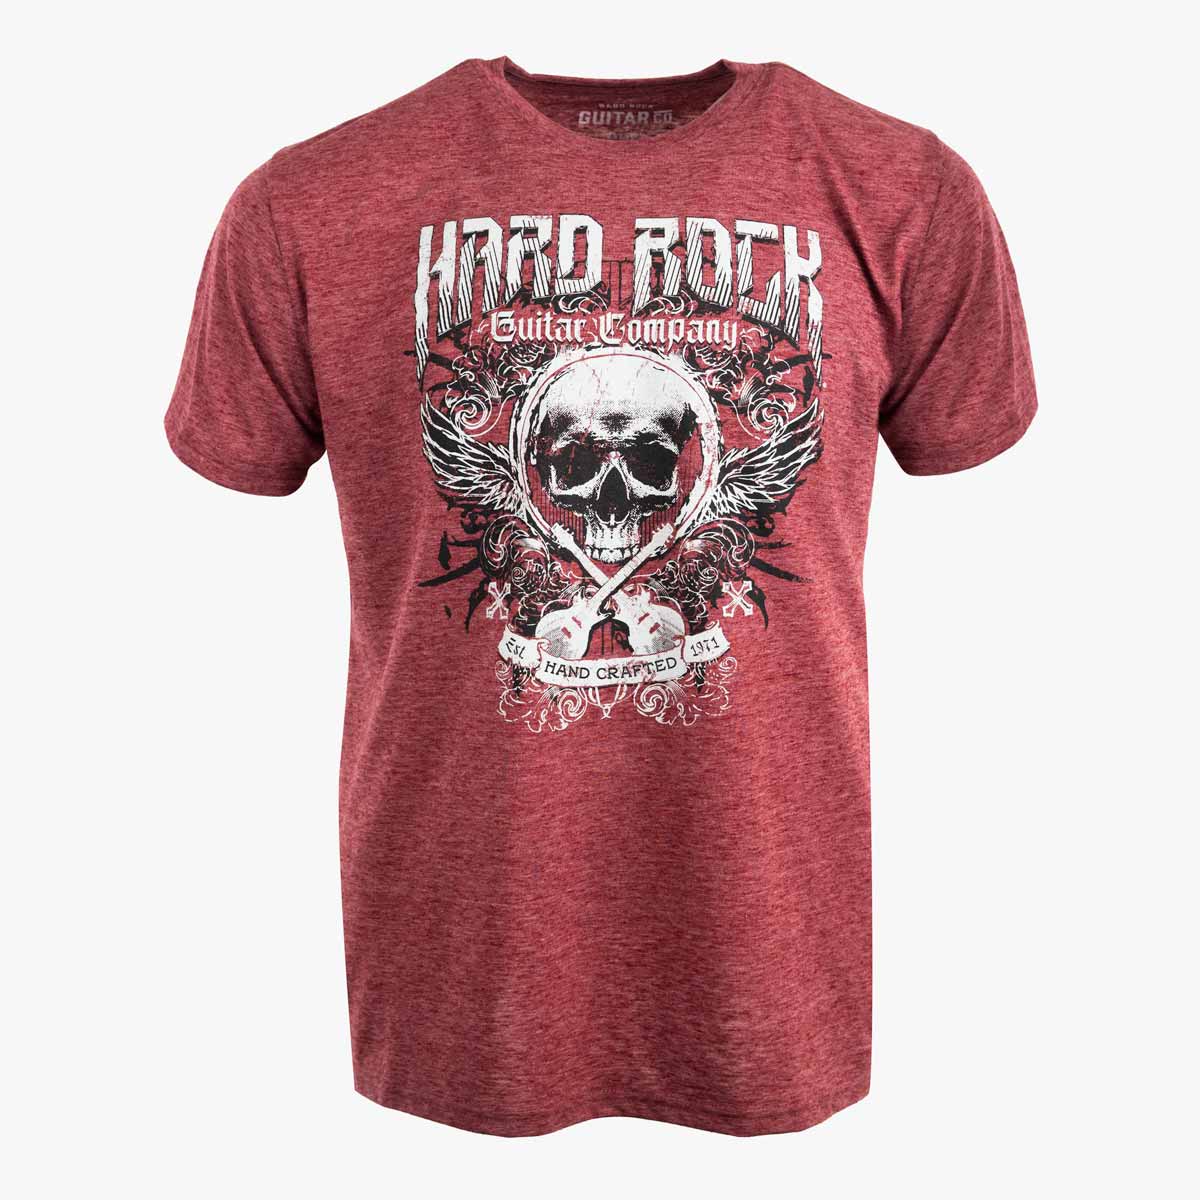 Guitar Company Relaxed Fit Skull Tee in Marbled Maroon image number 2